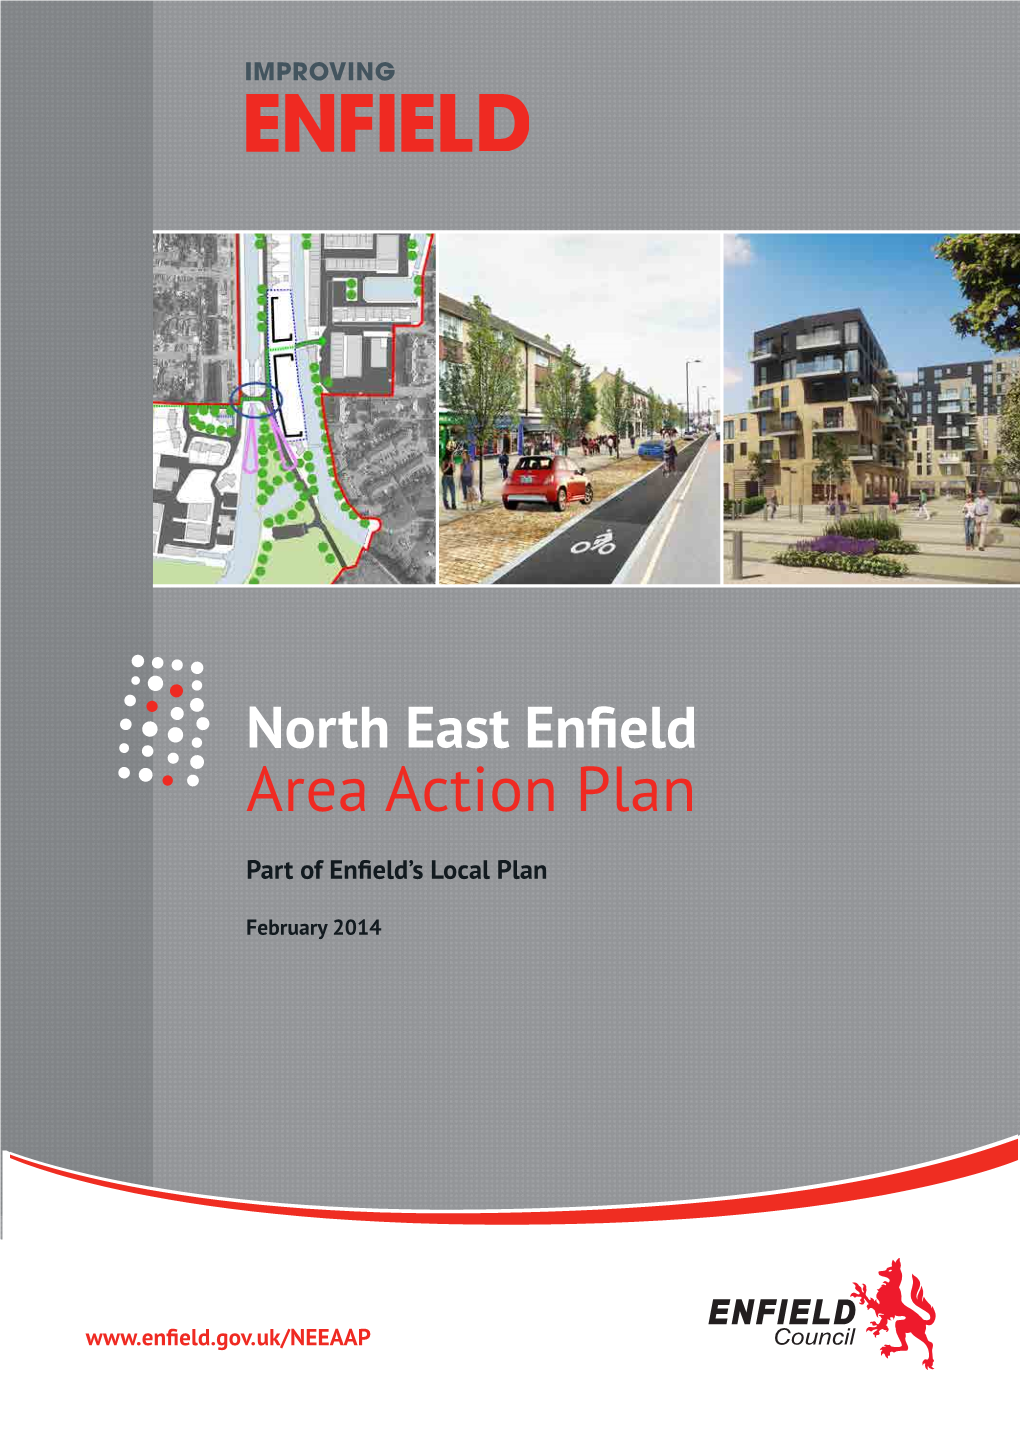 Area Action Plan the Enfield Ribbon Is a New Branding Element Used to Bring a Distinctive Look and Feel Across All Enfield Council Communications